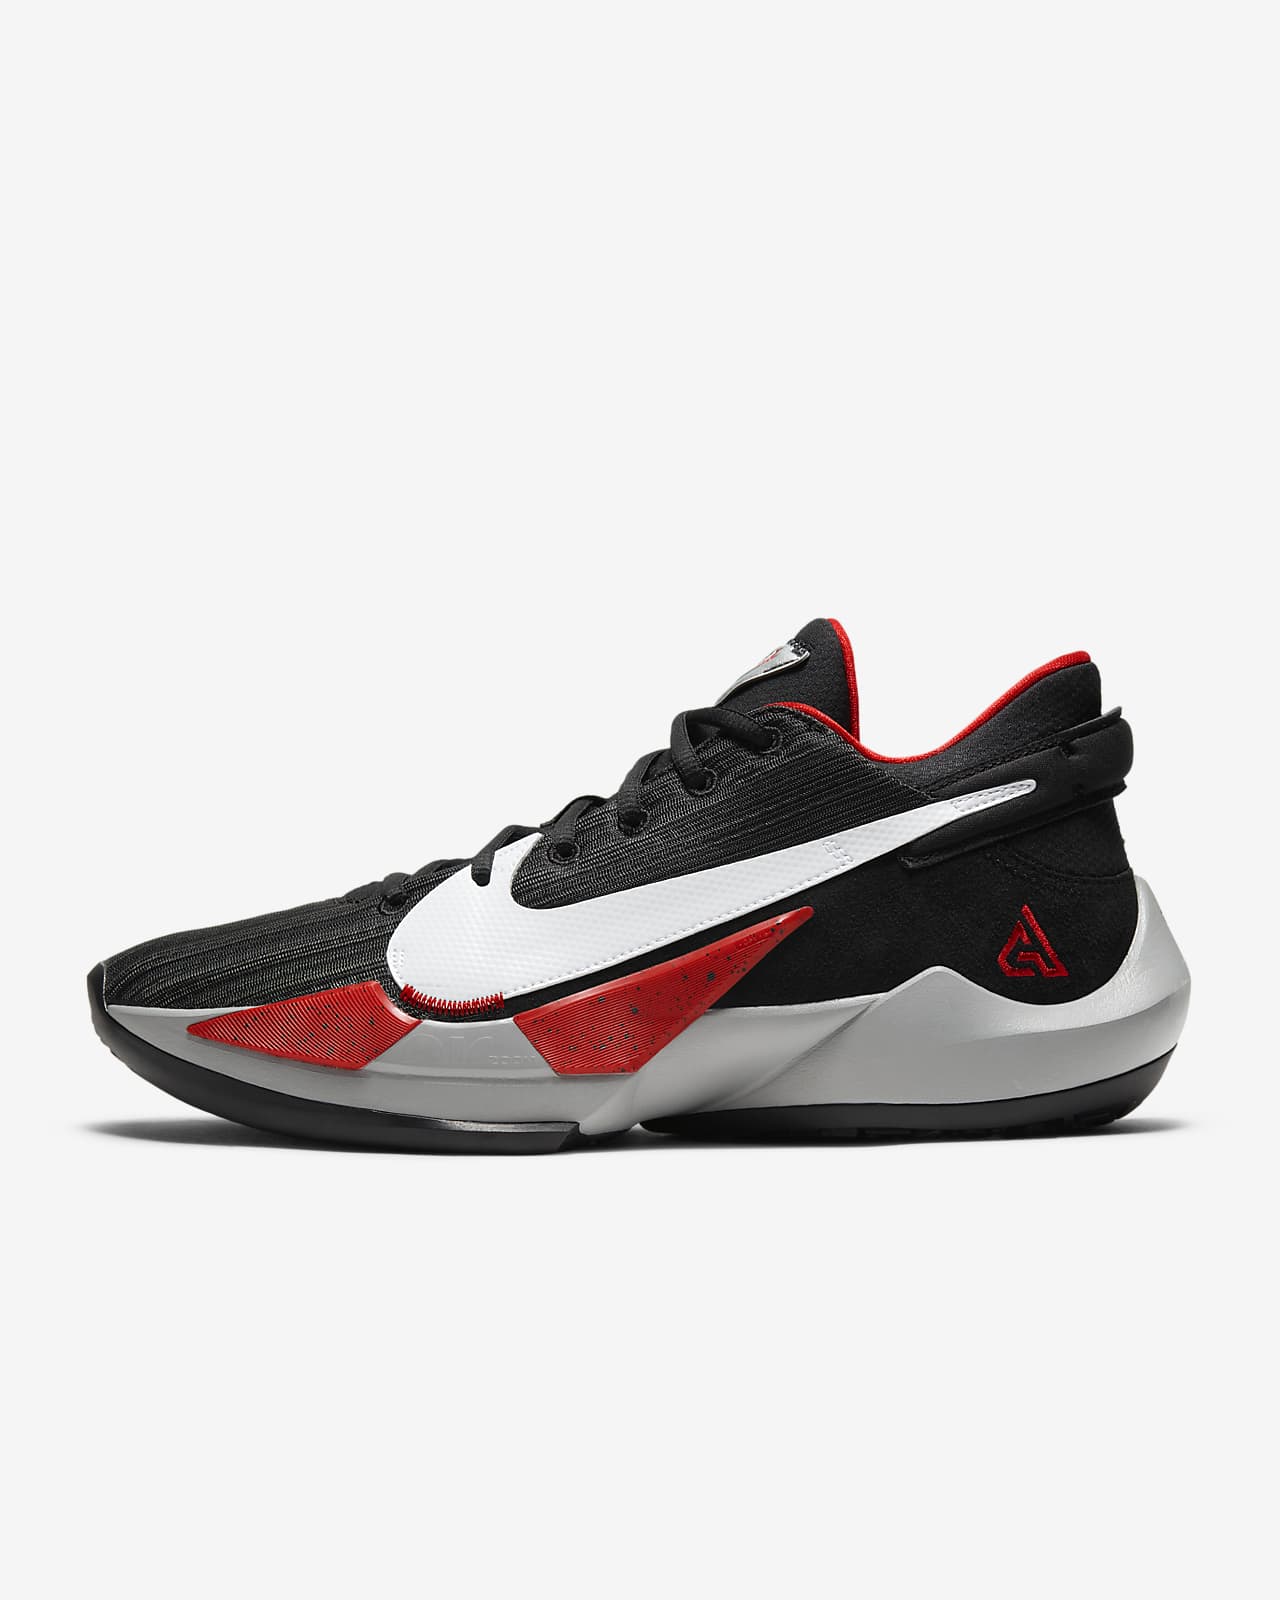 nike basketball shoes white and red